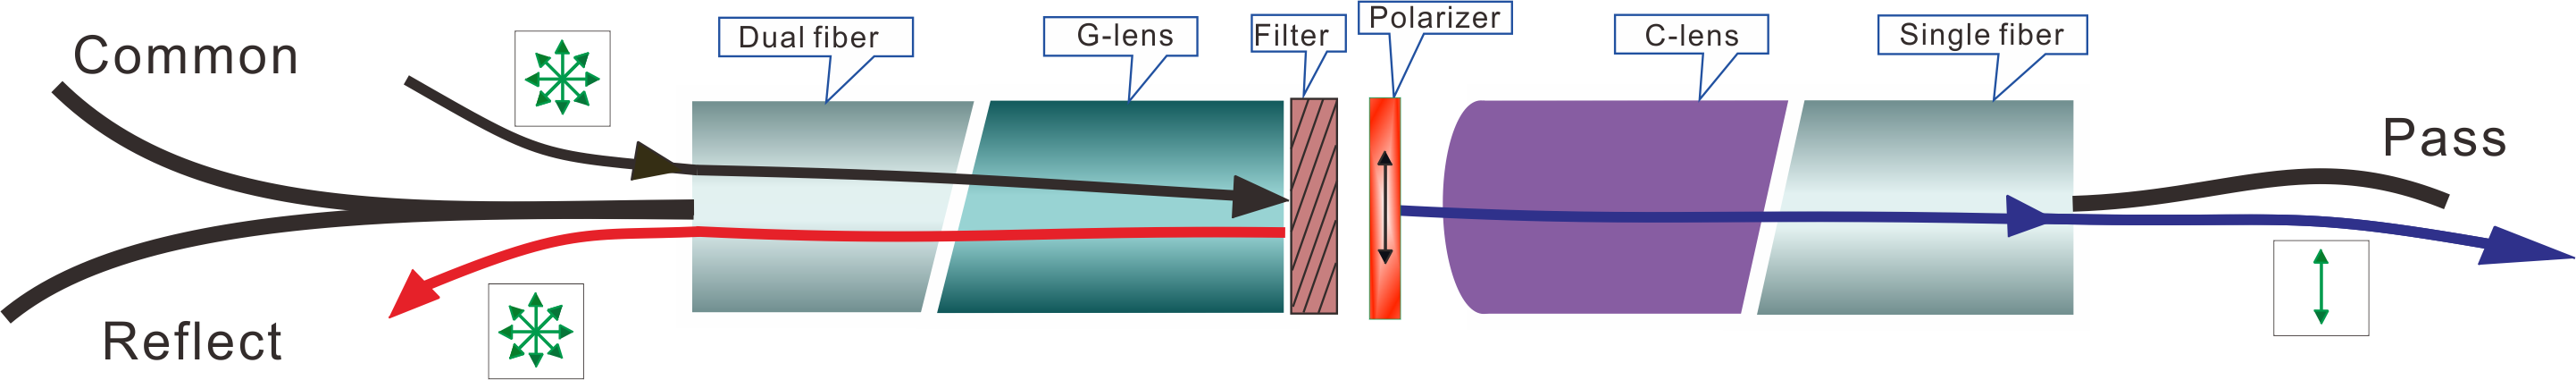 Schematic diagram of structure of WDM with pass signal add polarizer